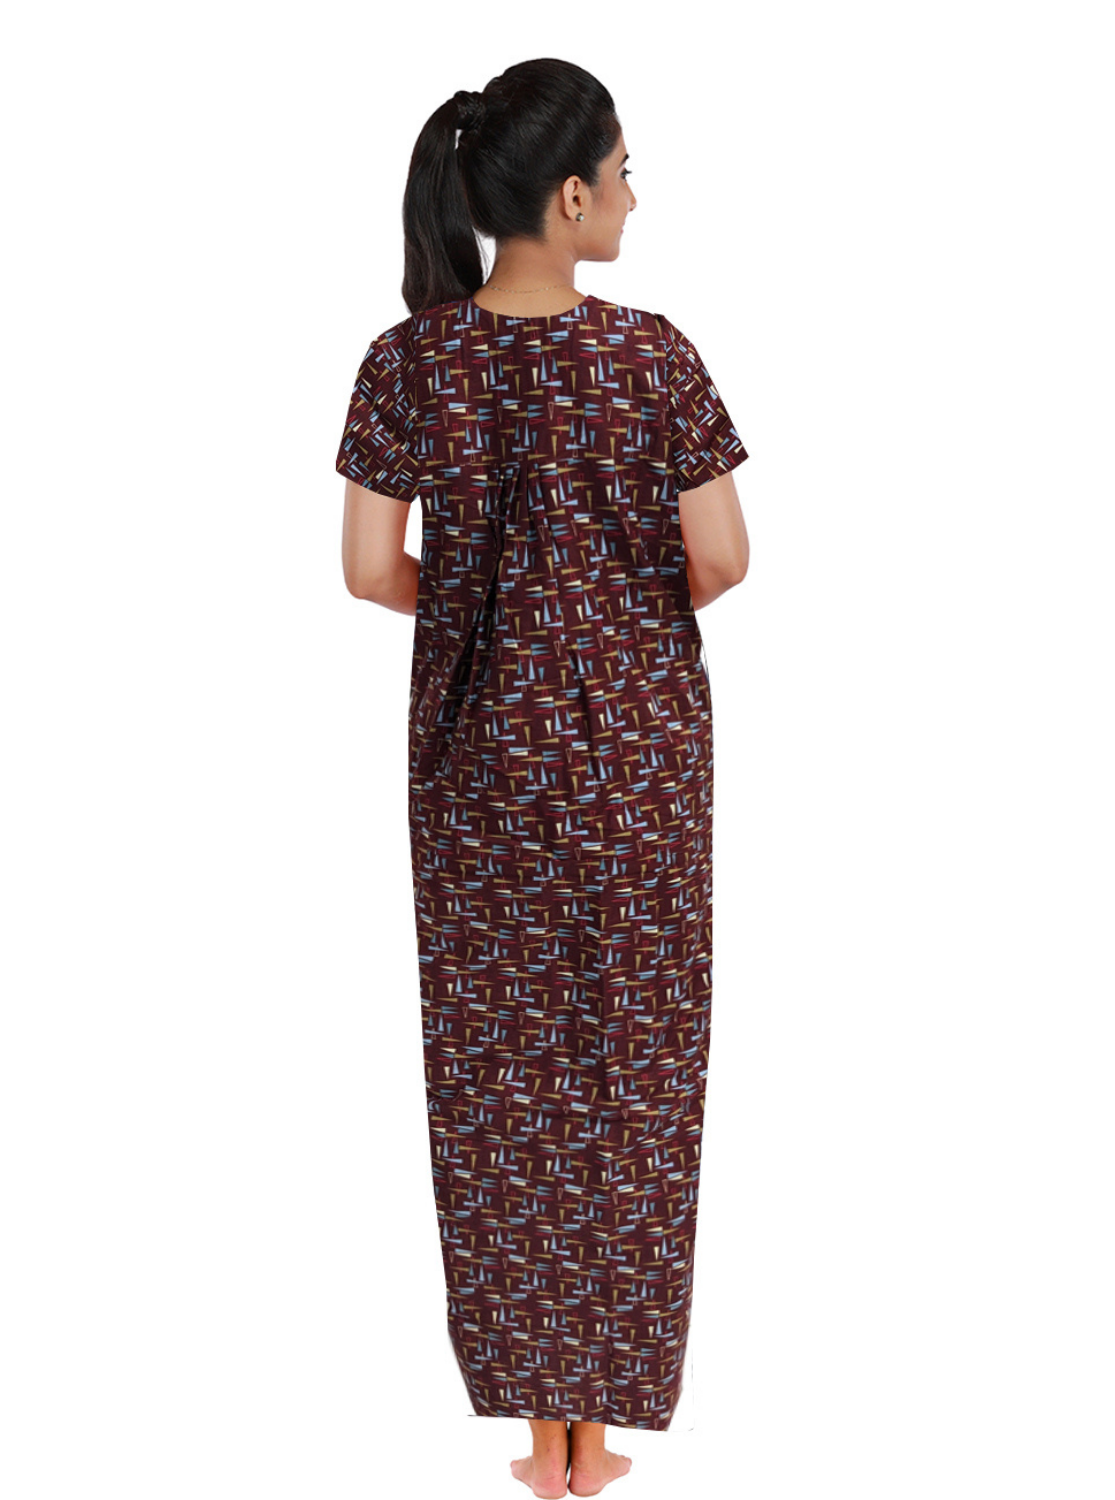 MANGAI New Cotton PLEATED Model 3XL Size Nighties - Fancy Neck | With Side Pocket |Shrinkage Free Nighties | Trendy Collection's for Trendy Women's